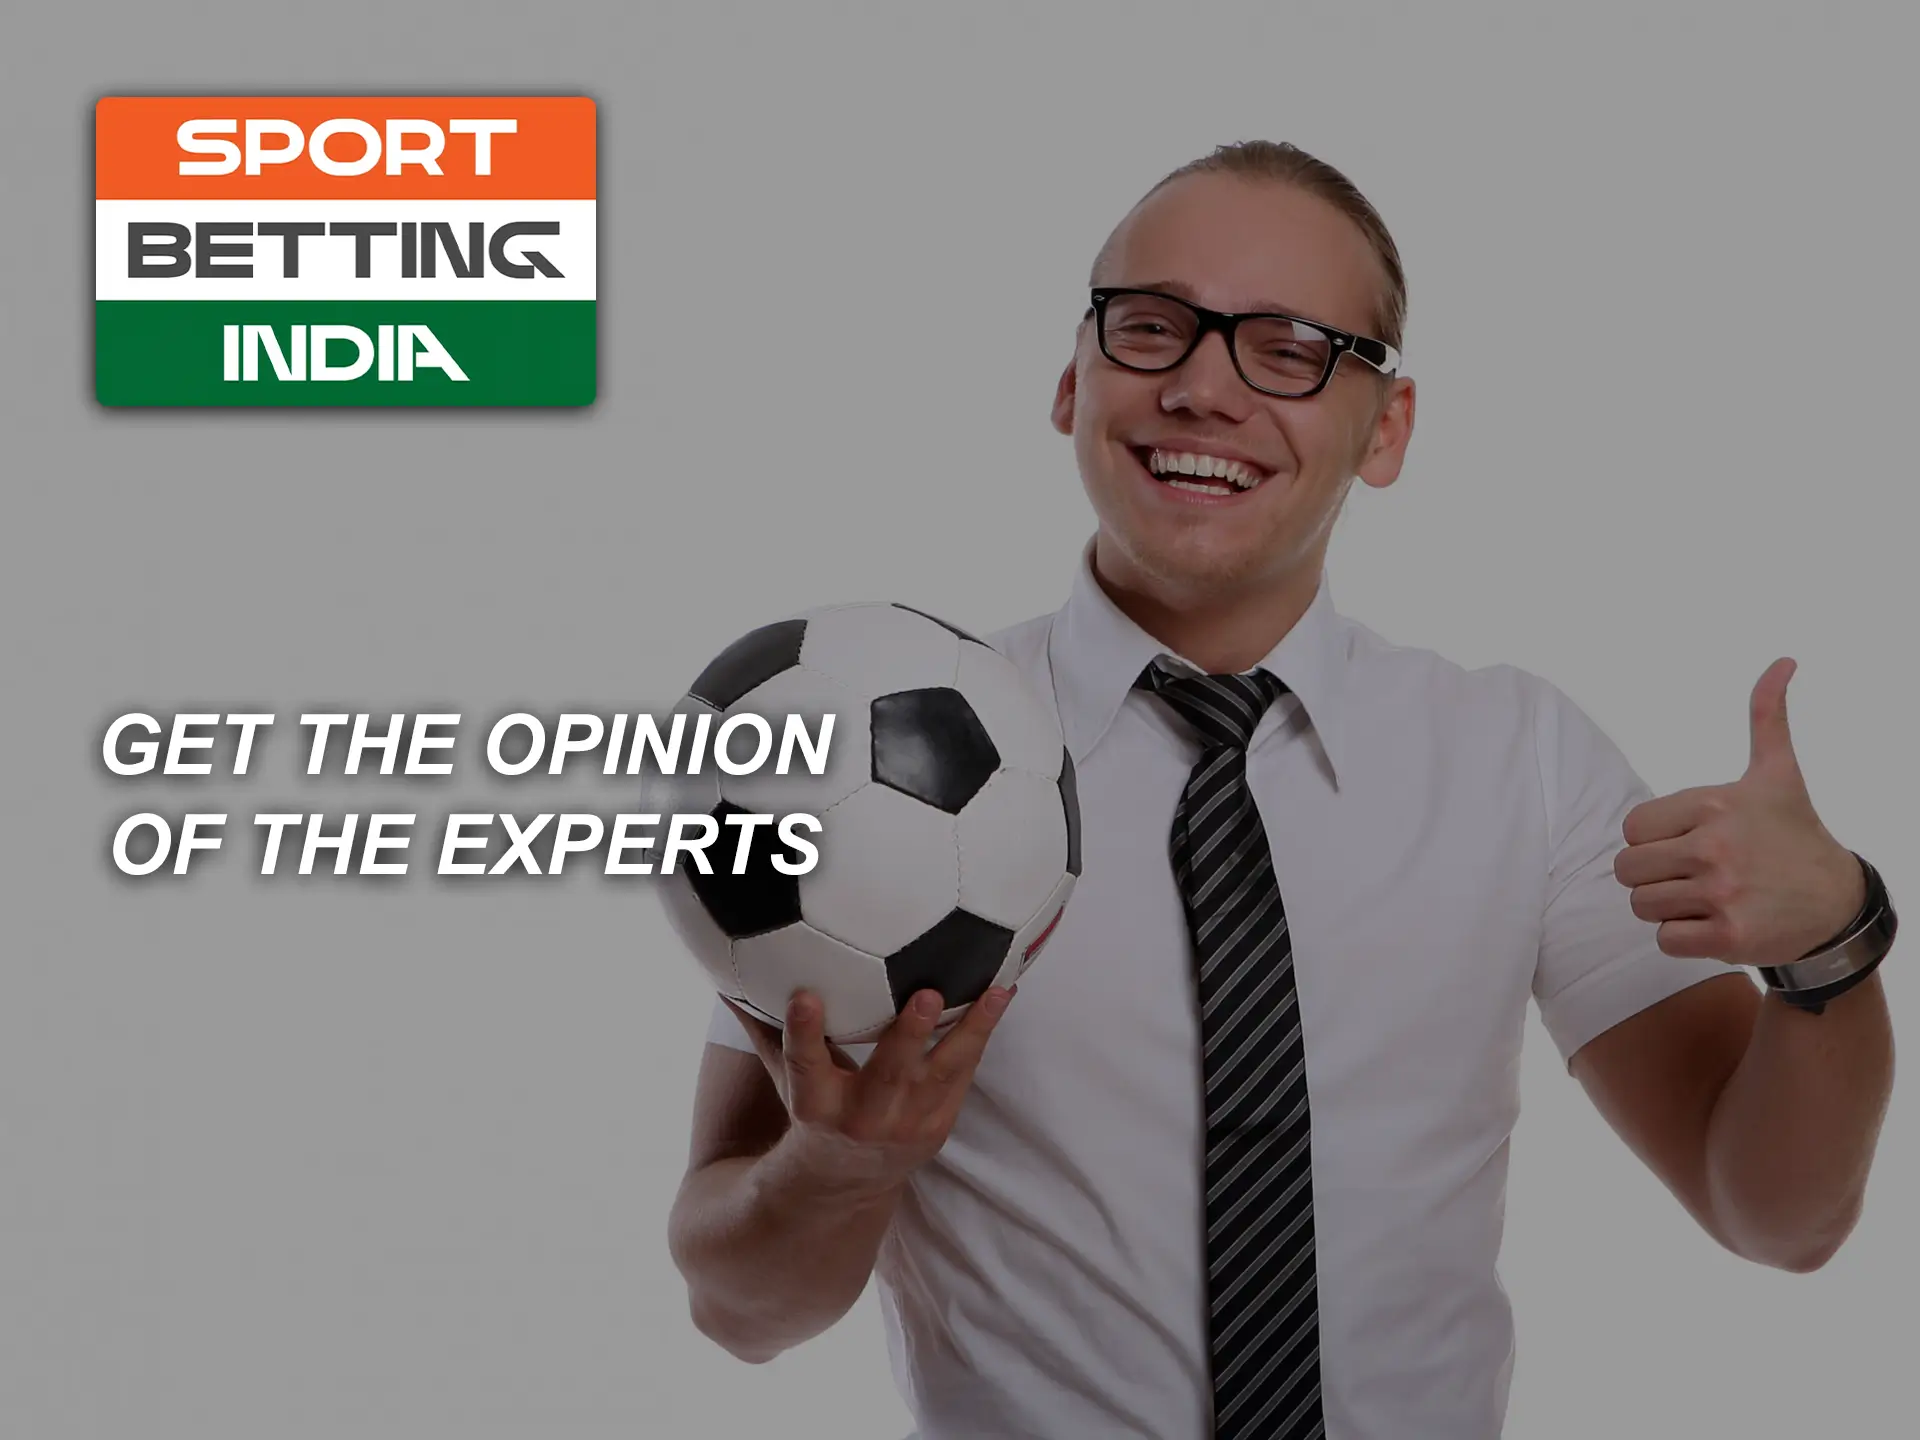 Sometimes rely on the opinion of renowned experts in the world of football.